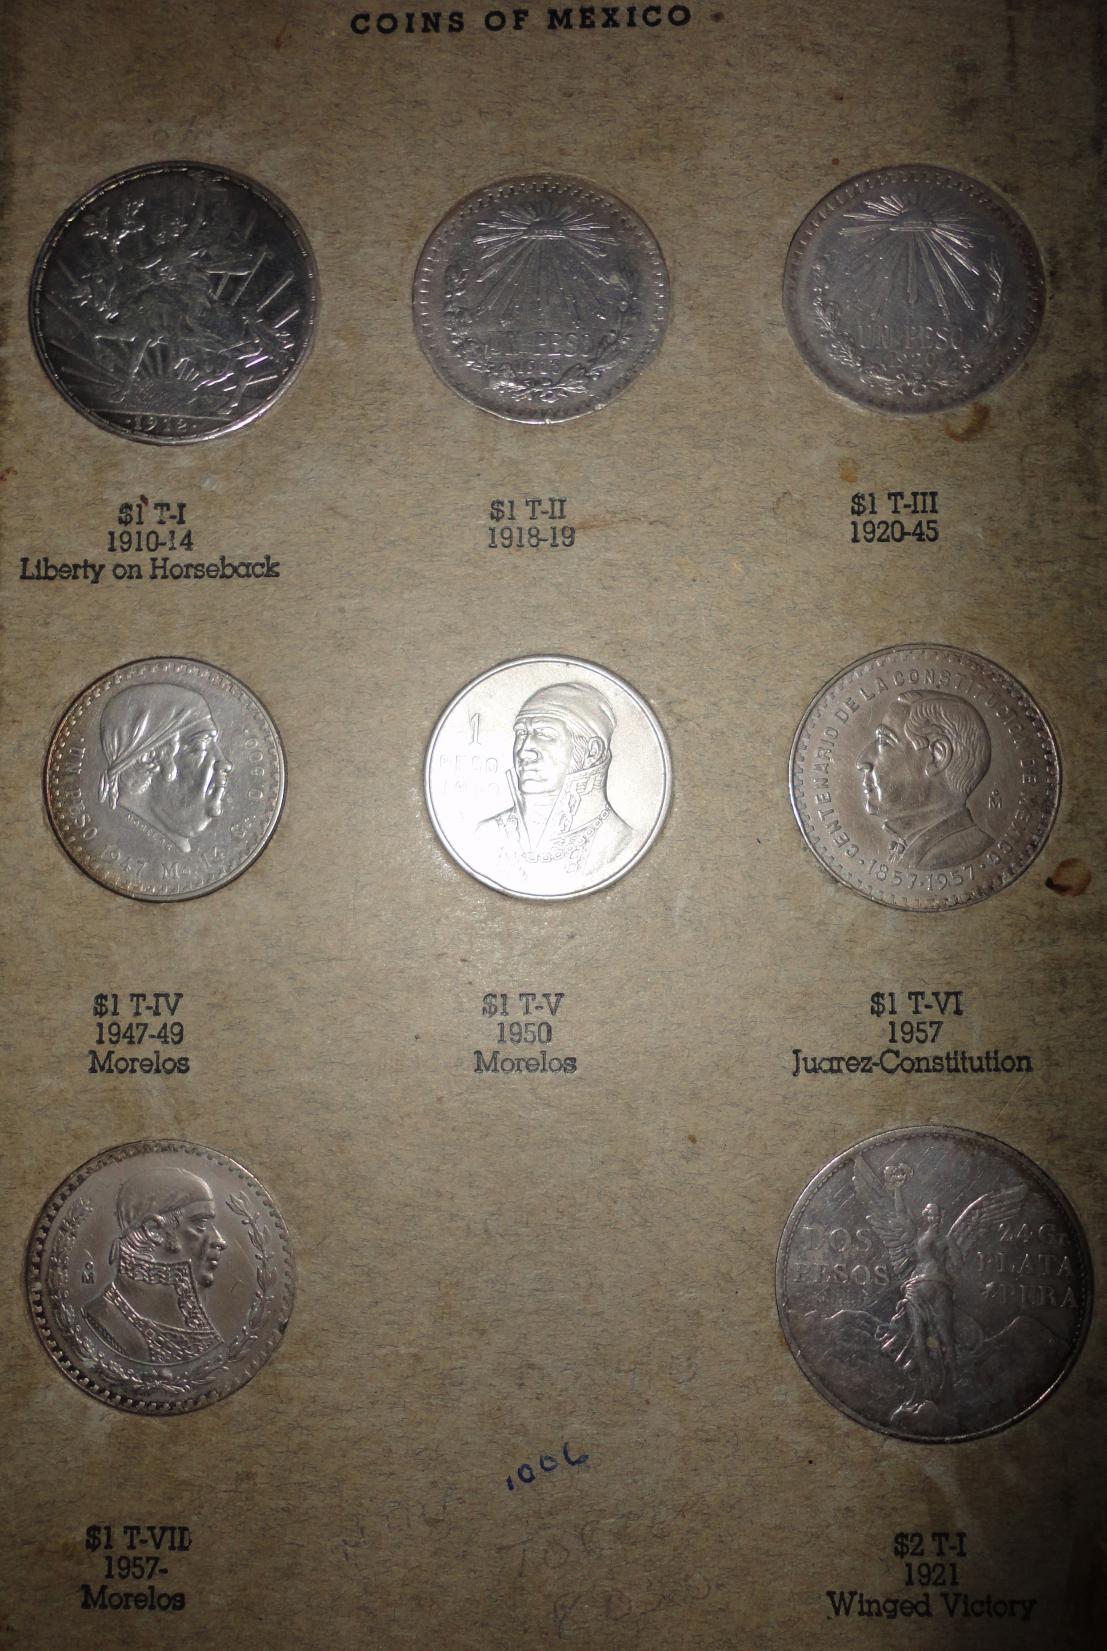 What are the coins of Mexico?